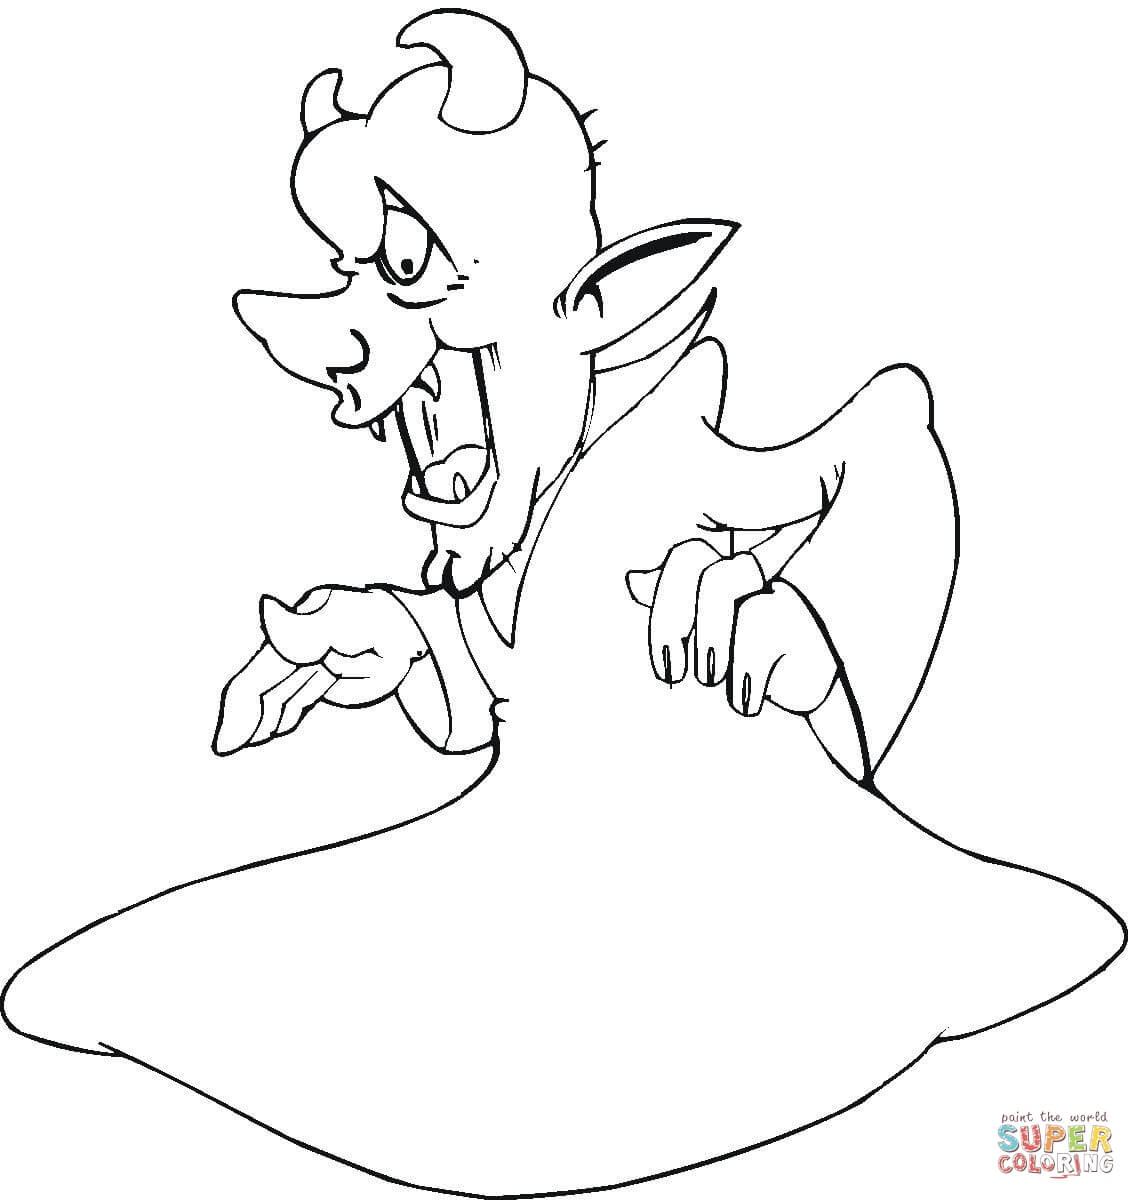 Demons & Devils coloring pages | Free Coloring Pages